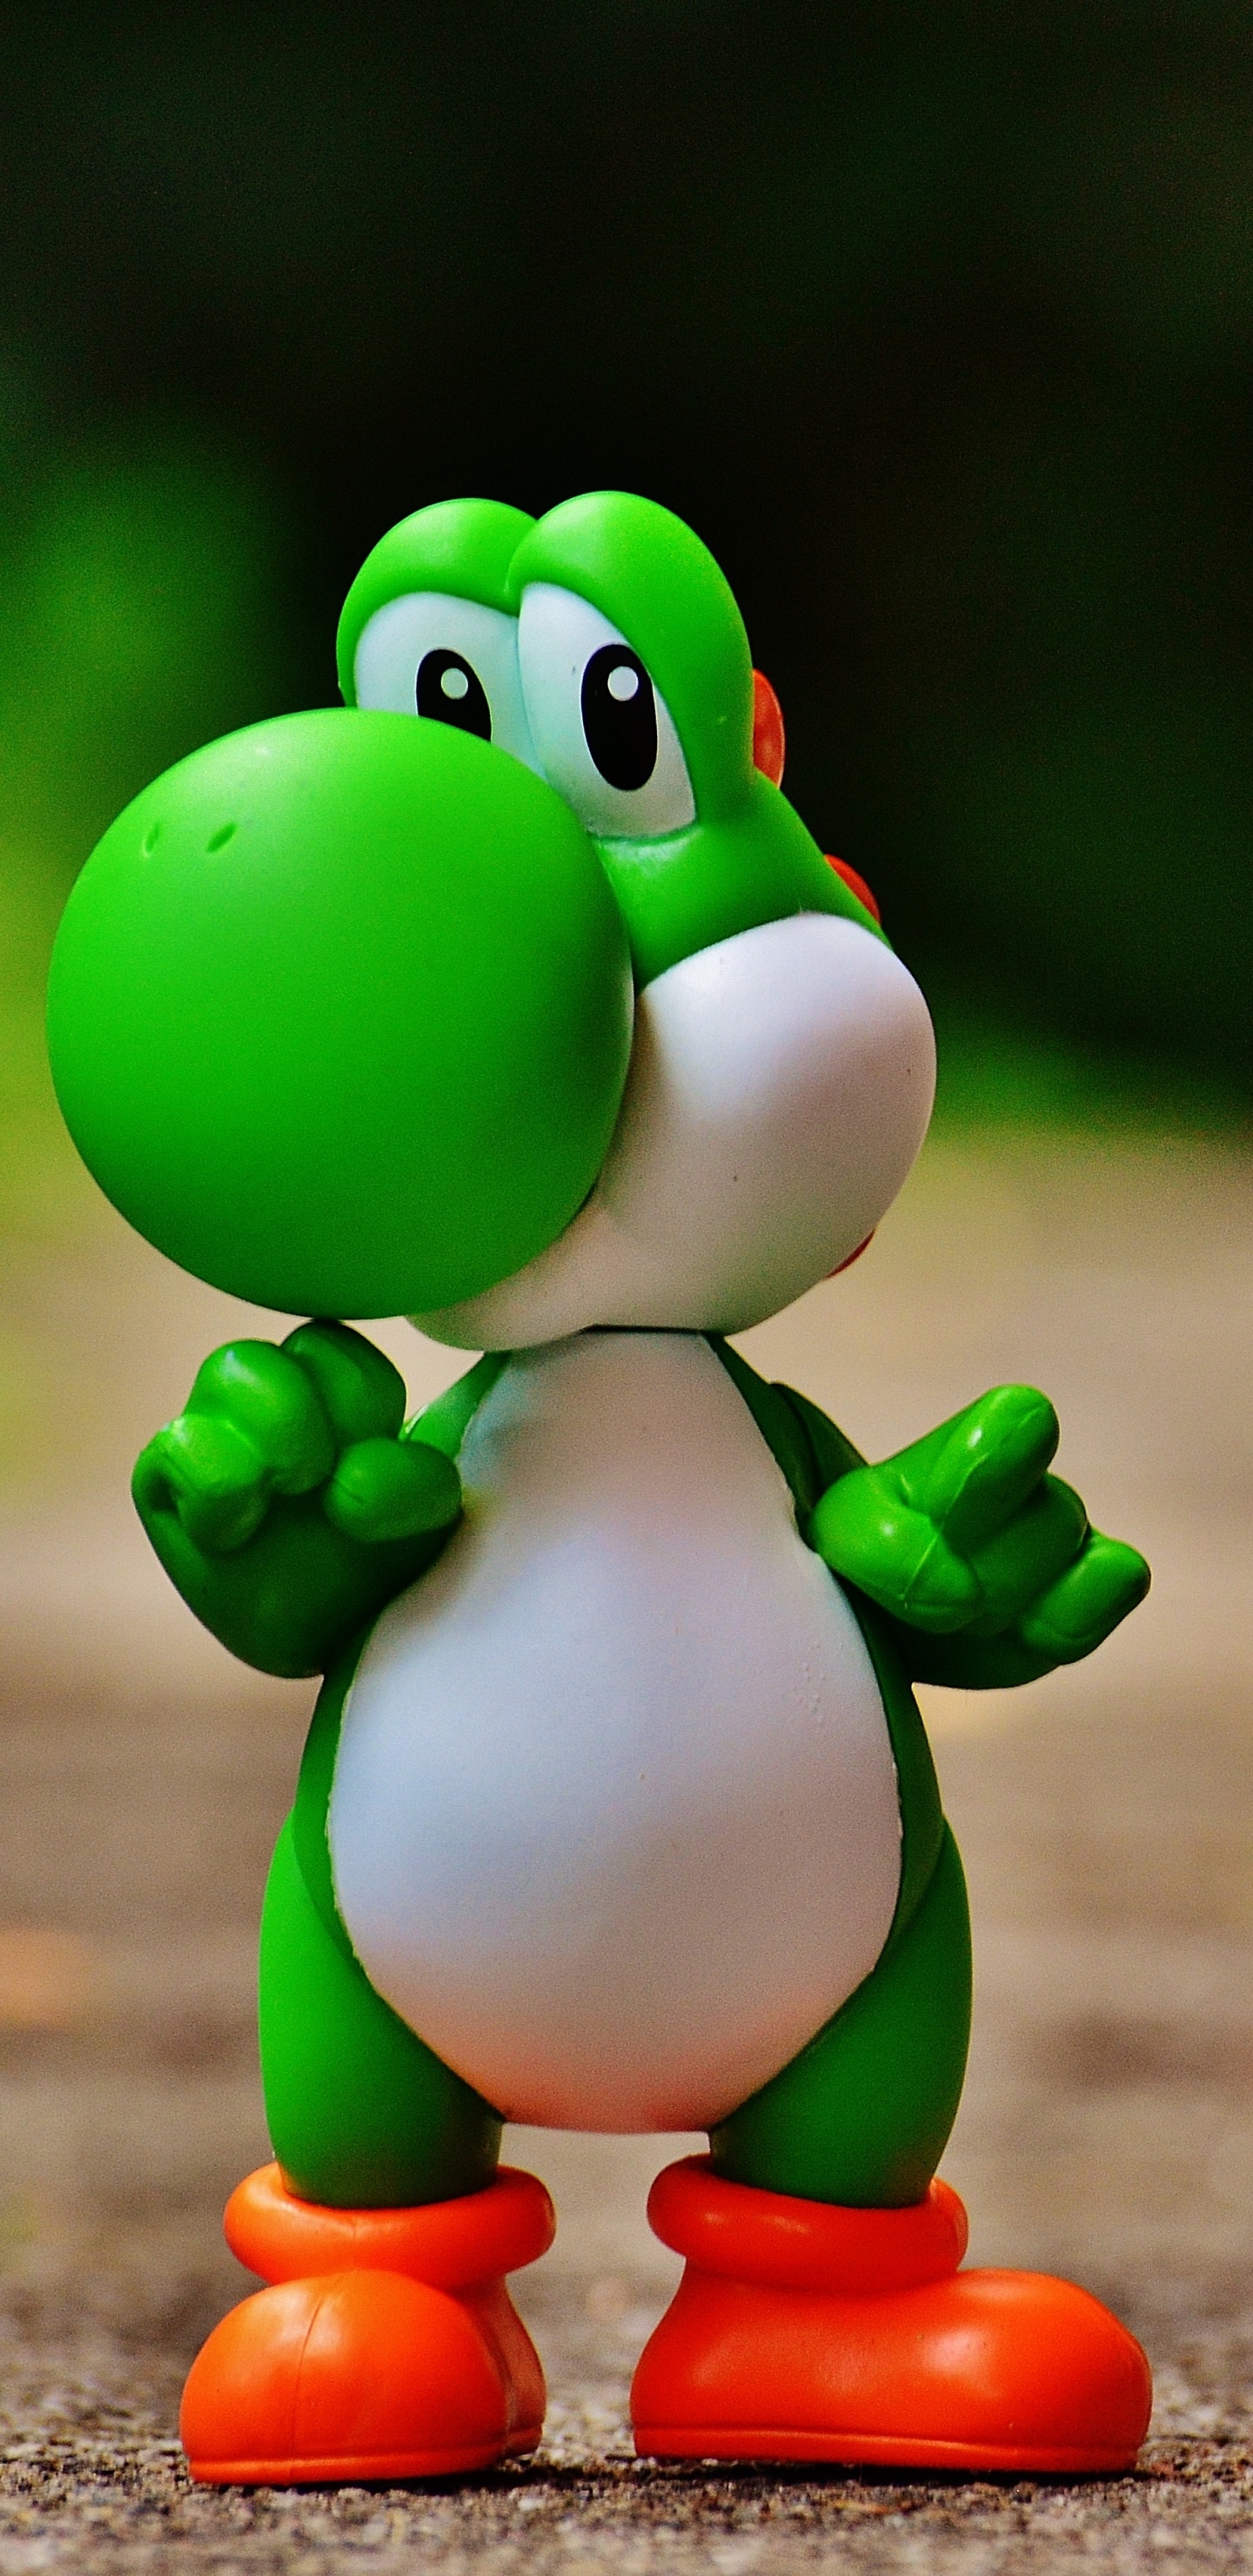 Yoshis Island, Super Mario World, Green, Toy, Action Figure. Wallpaper in 1440x2960 Resolution